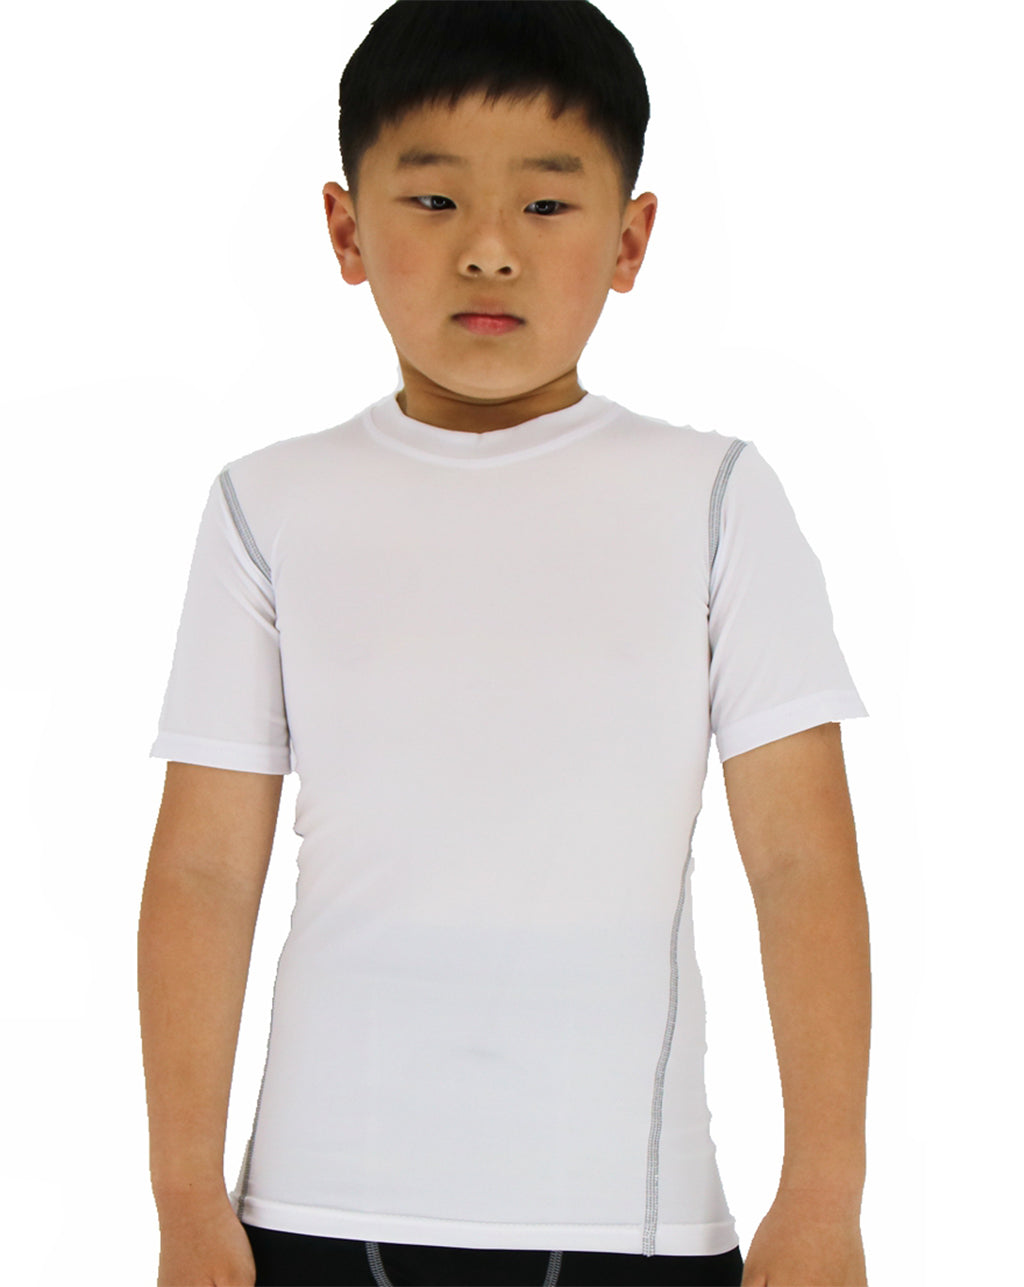 LANBAOSI 2 Pack Boys Athletic Dry Fit Compression Short Sleeve T